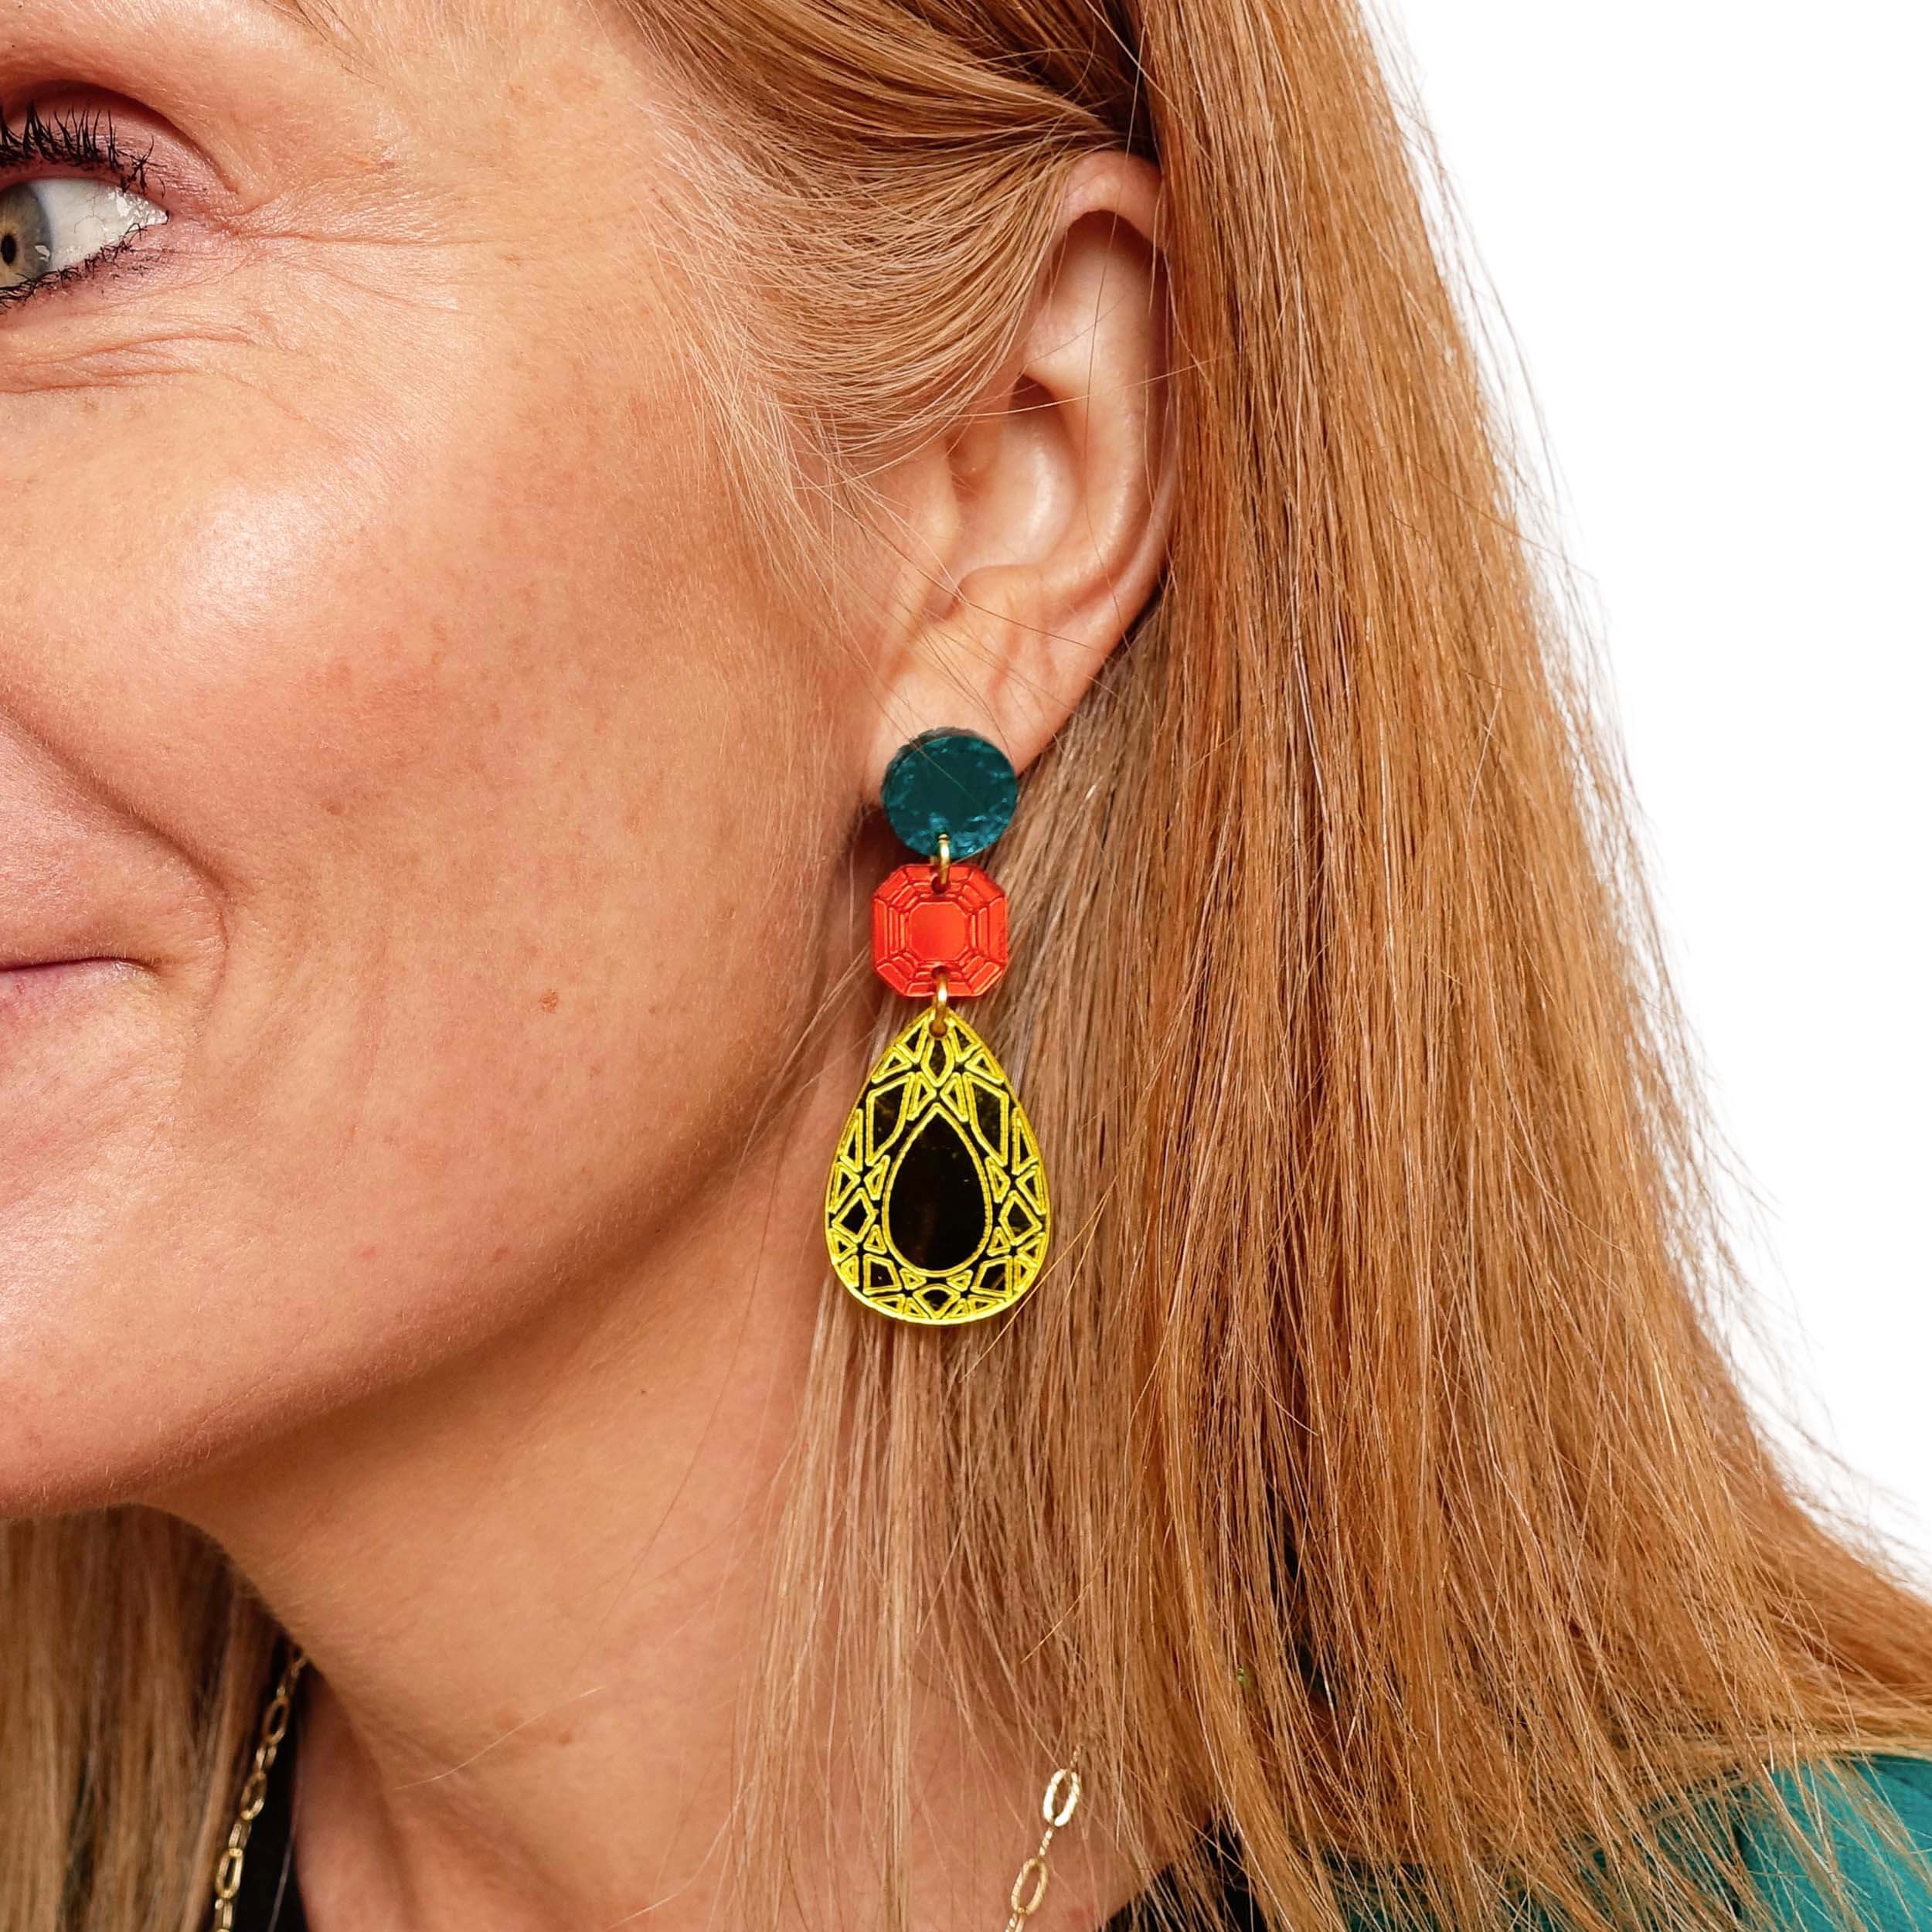 Sarah Day wears Belle Époque Jewel drop earrings in Flame Mambo: yellow, flame and teal colours.  